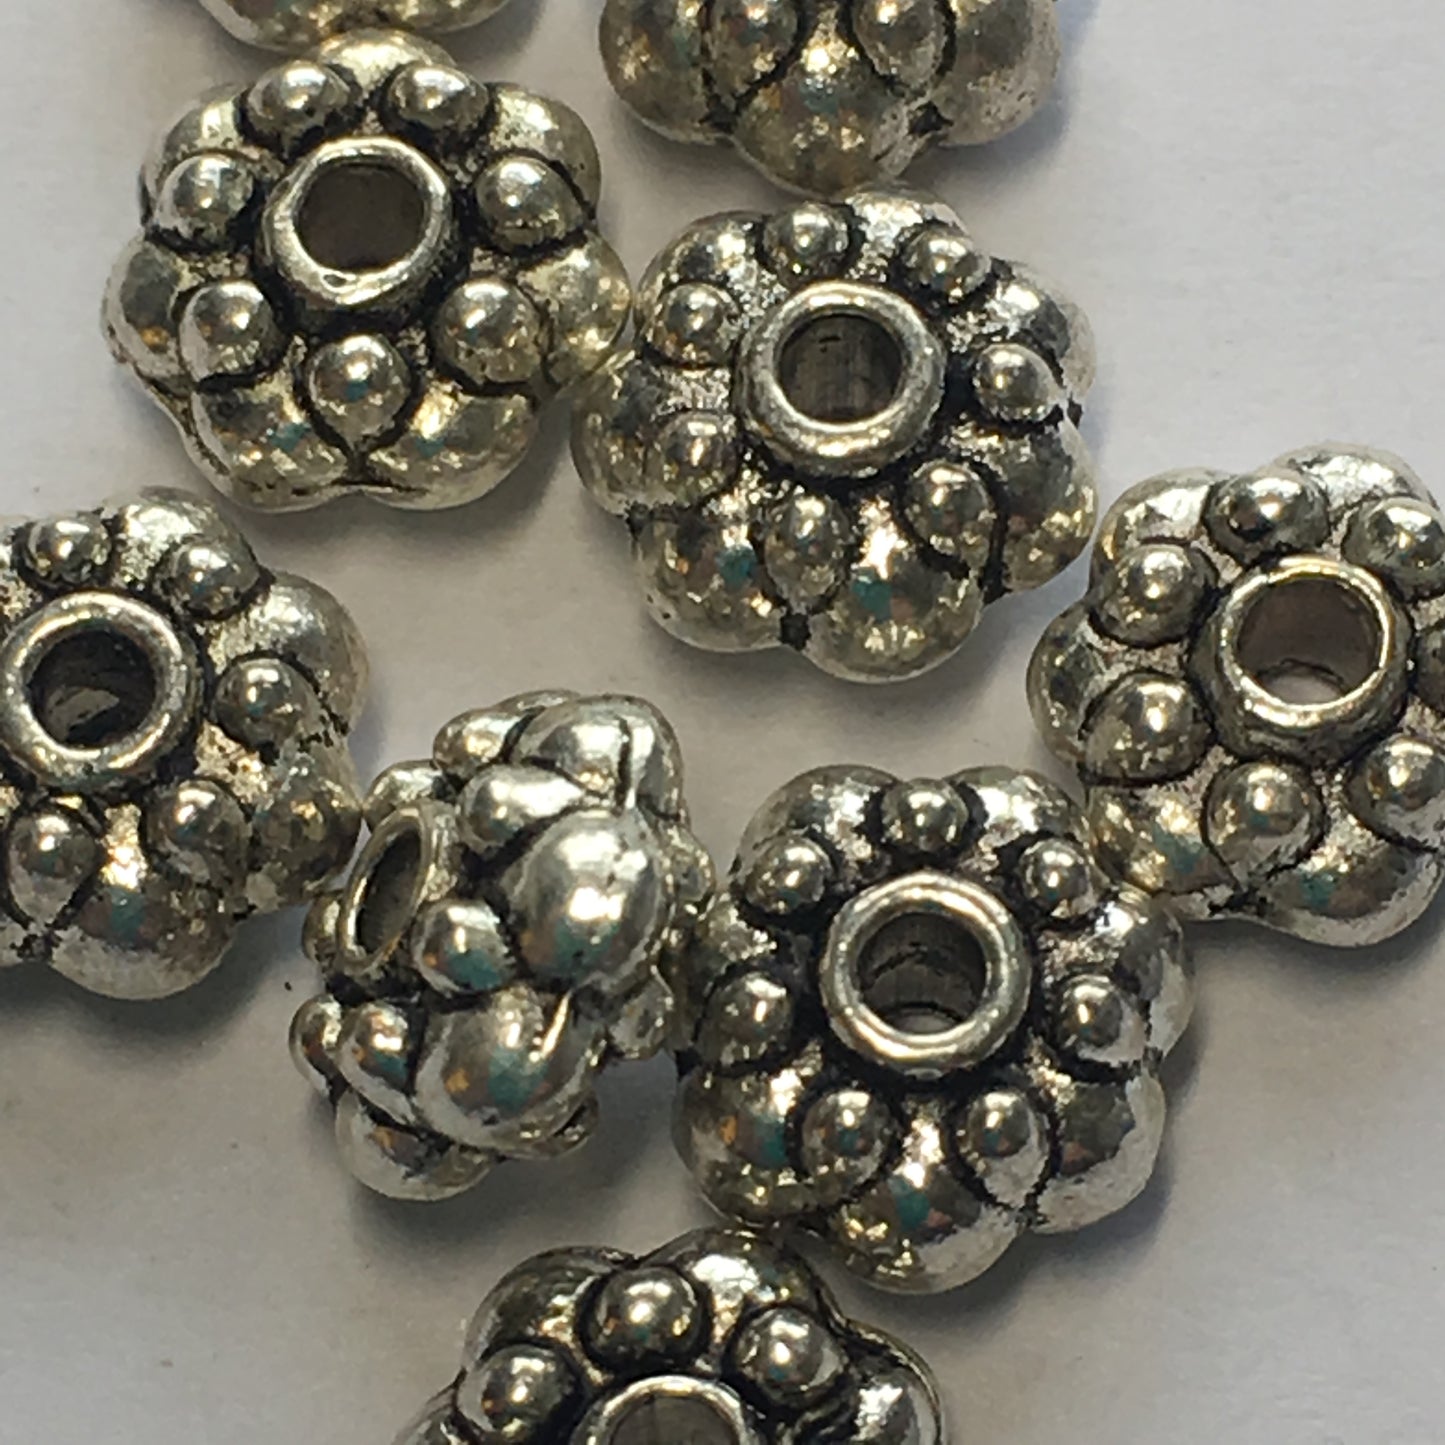 Antique Silver Bali Beads with Large and Small Granulations, 8 x 4 mm - 10 or 12 Beads